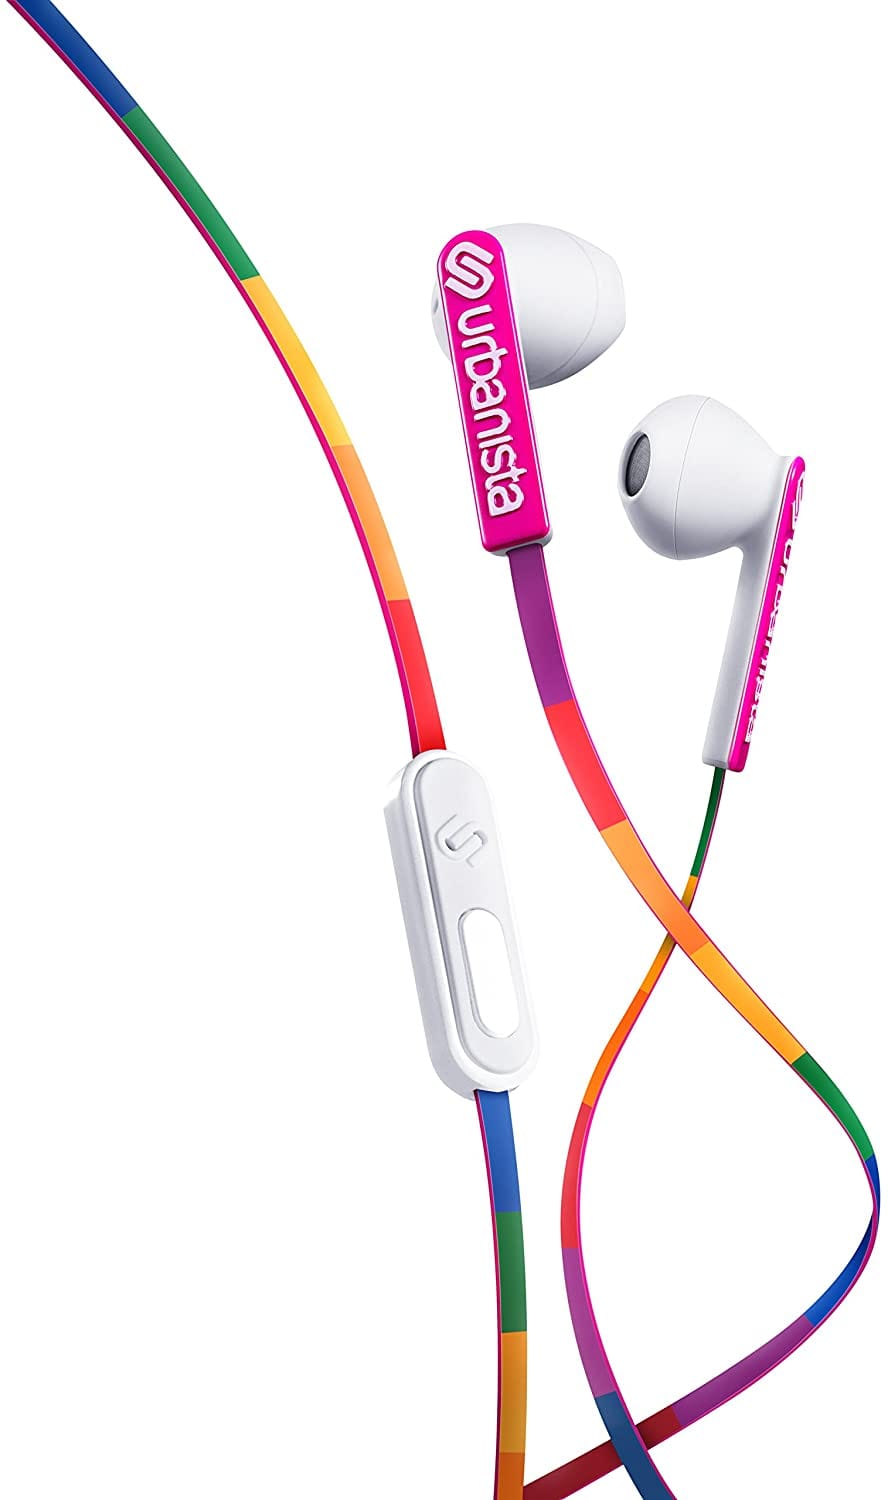 Urbanista San Francisco Earphones, In Ear Headphones with Built-In Microphone, Pause/Play Button, Wired Headphones Compatible with iOS and Android, Rainbow